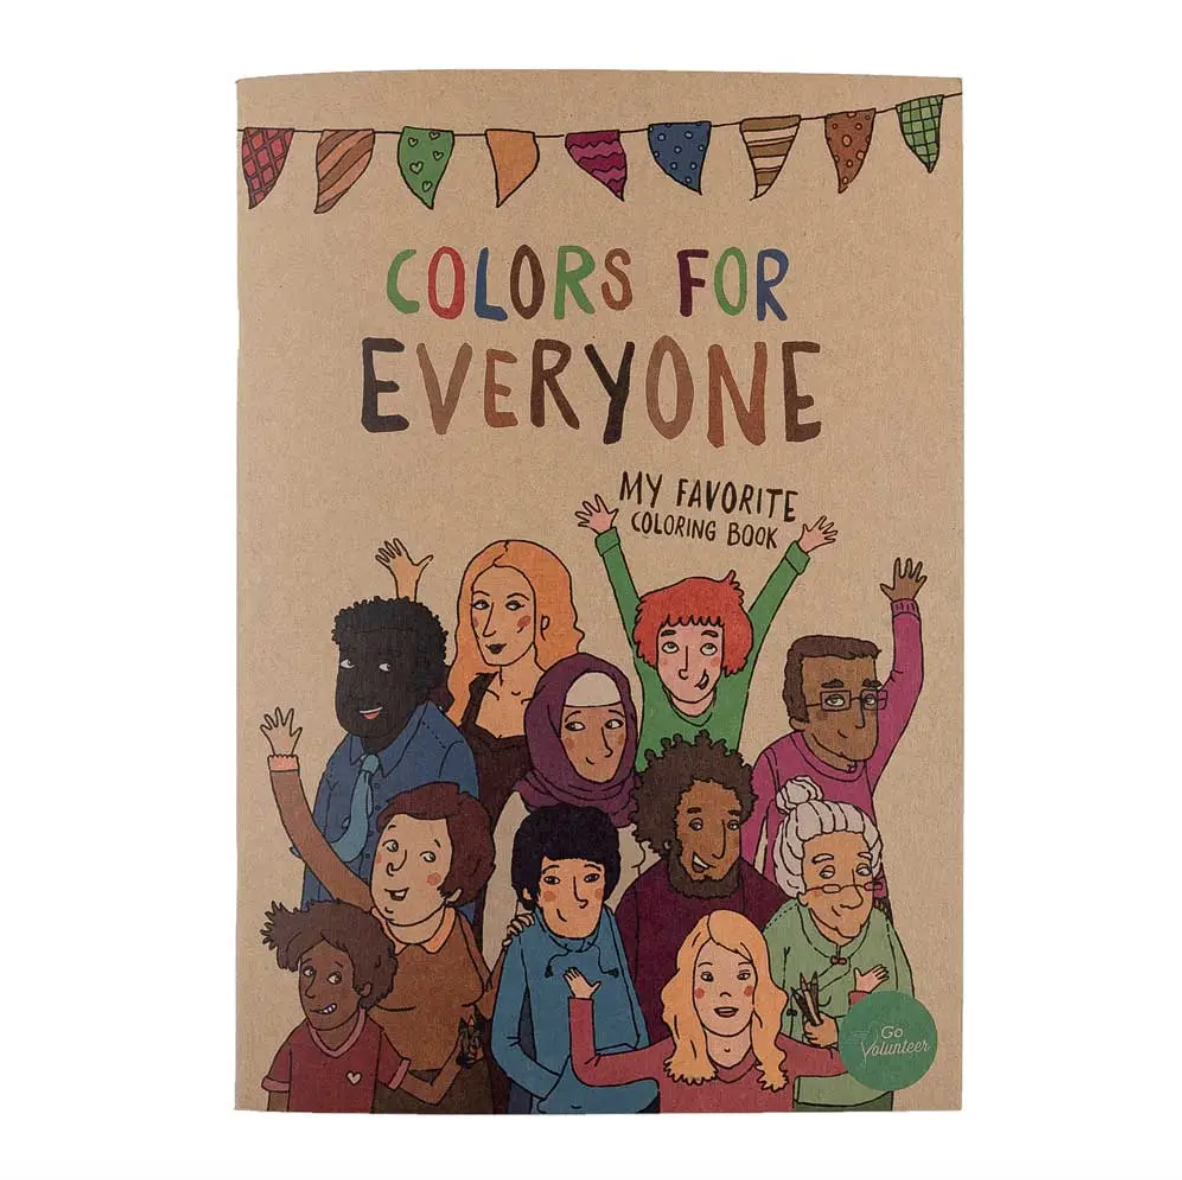 COLORS FOR EVERYONE COLORING BOOK